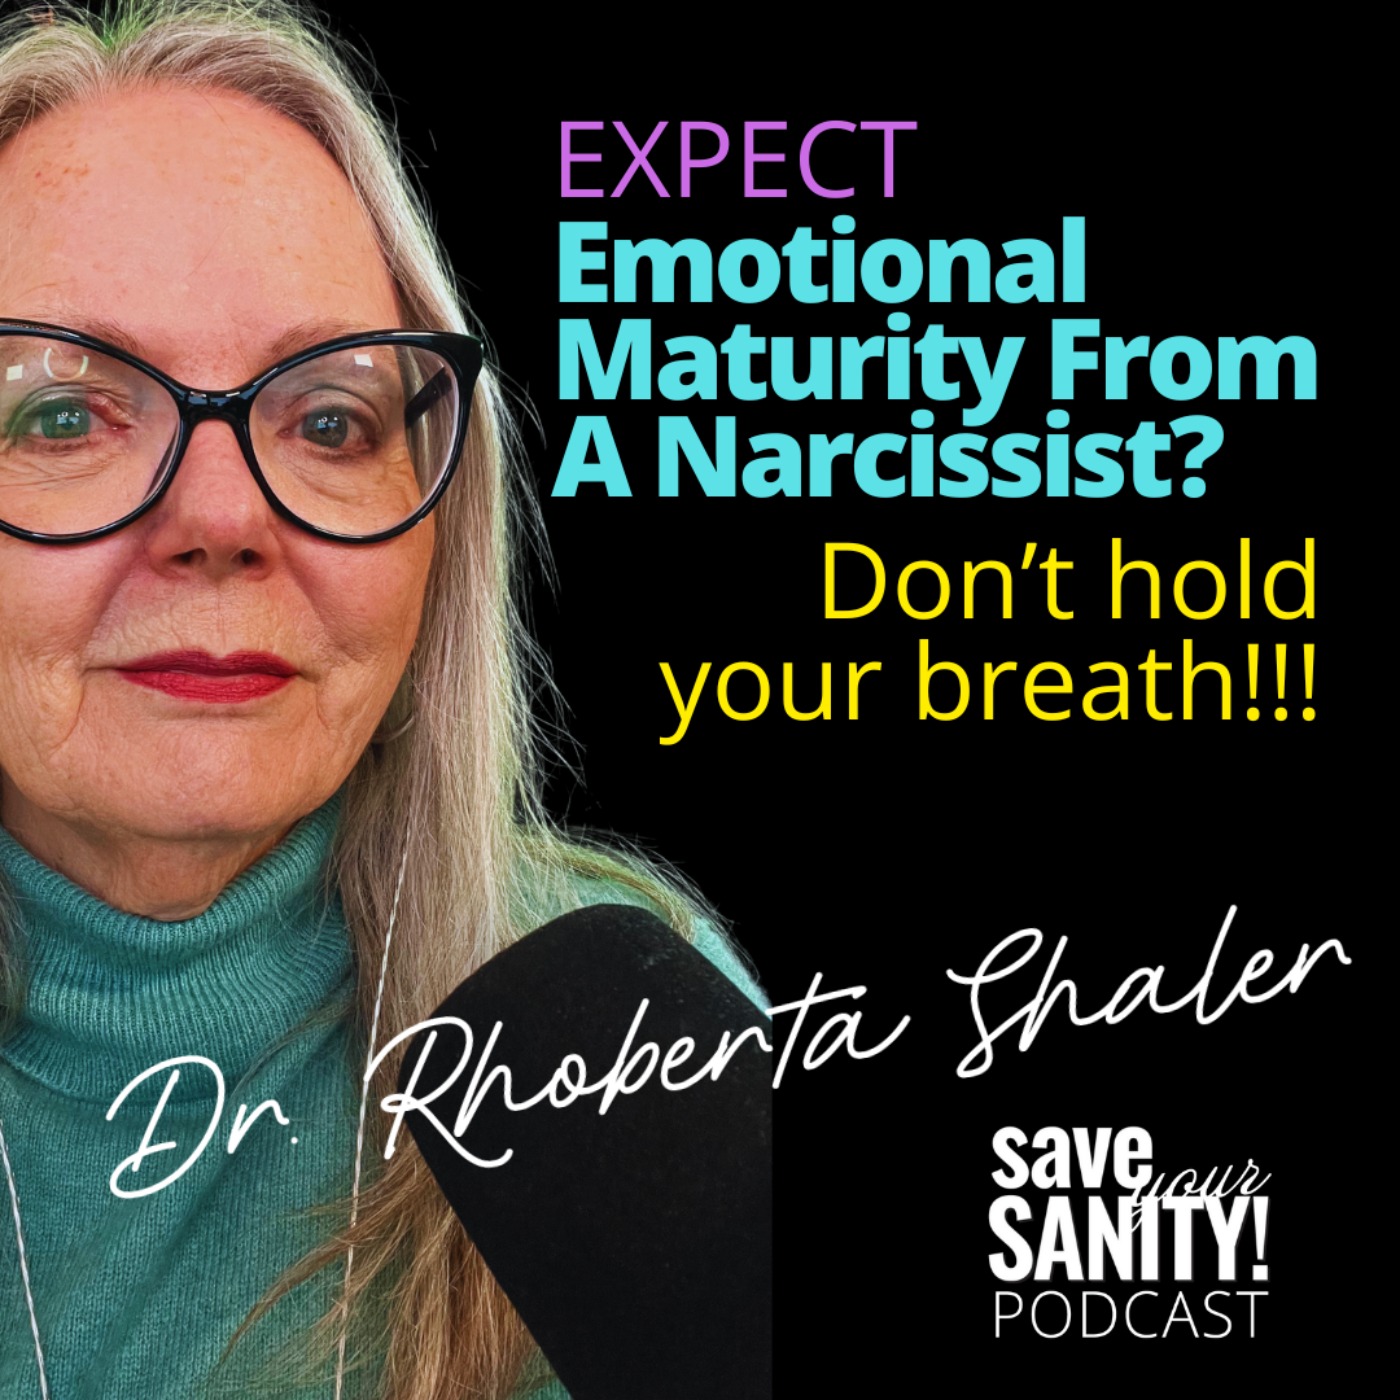 Expecting Emotional Maturity from a Narcissist? Don't Hold Your Breath!!!